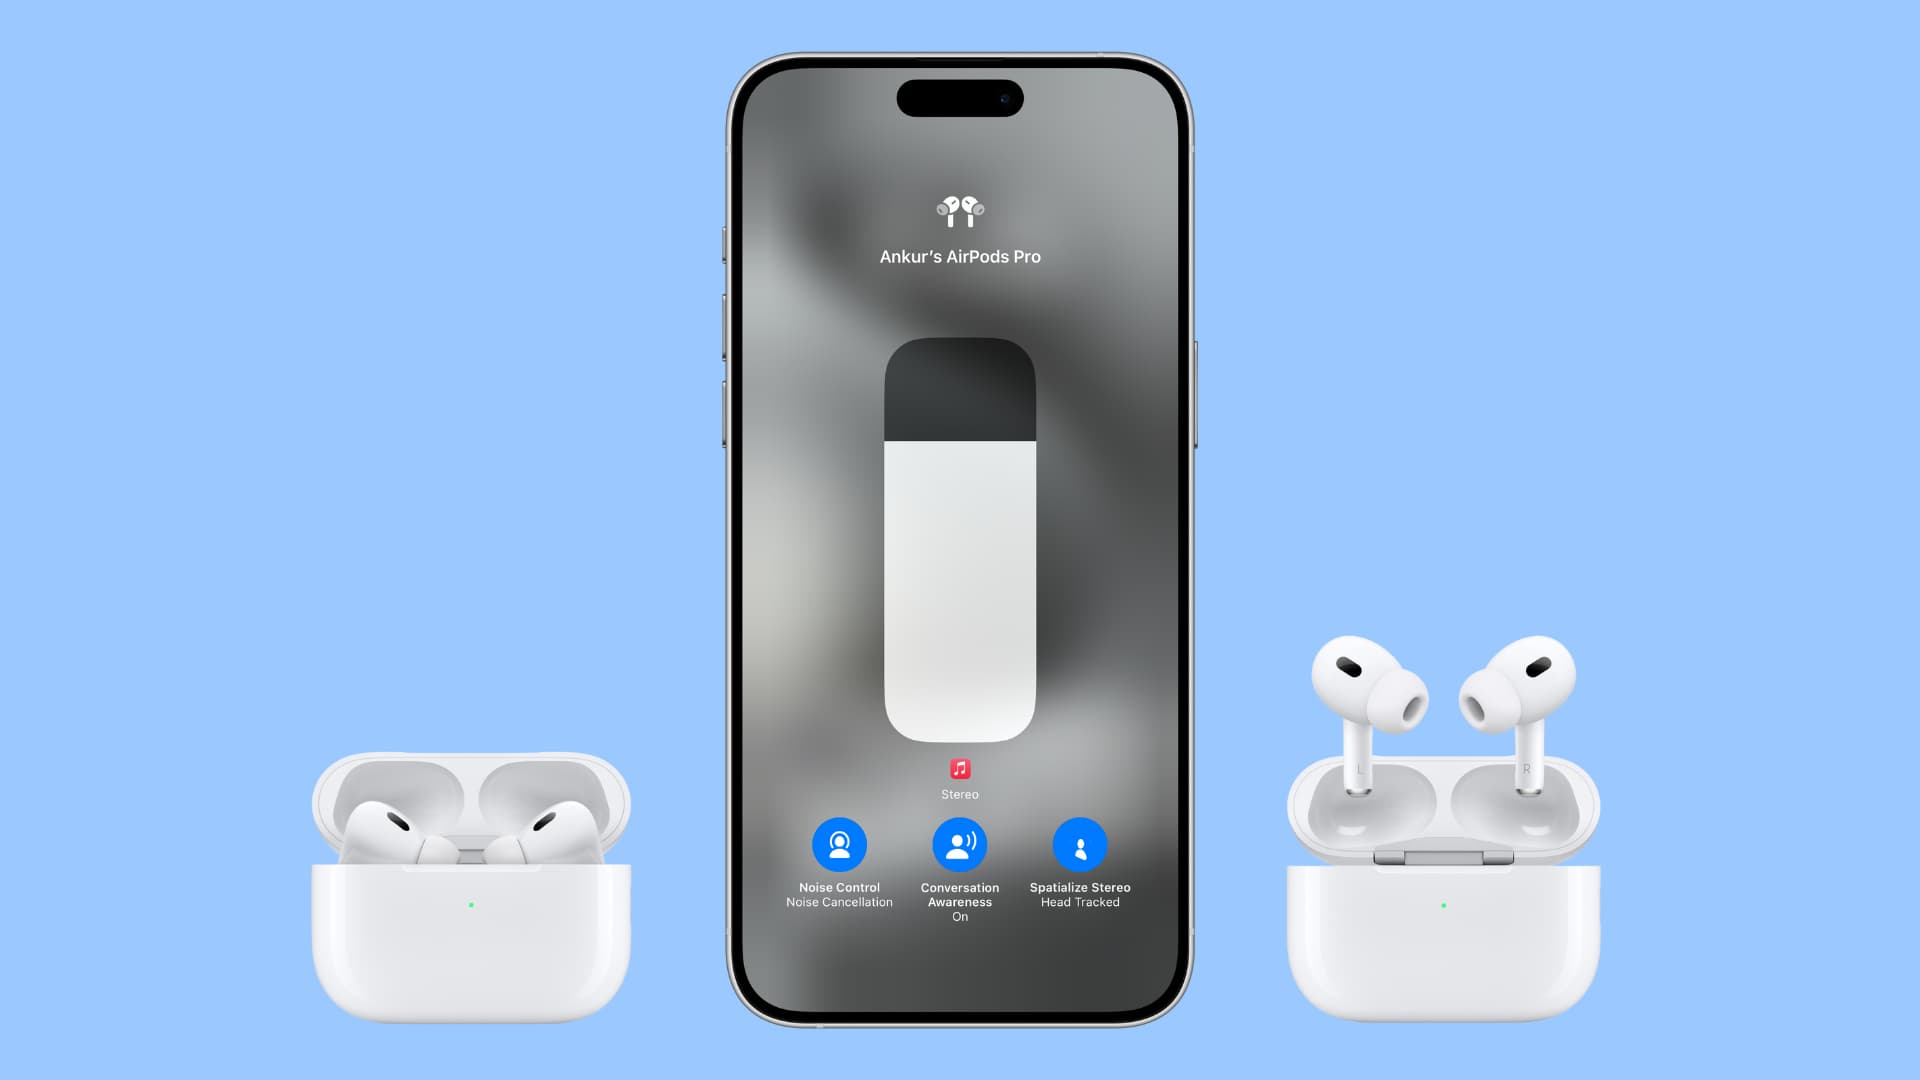 The best AirPods Pro tips for iPhone and iPad